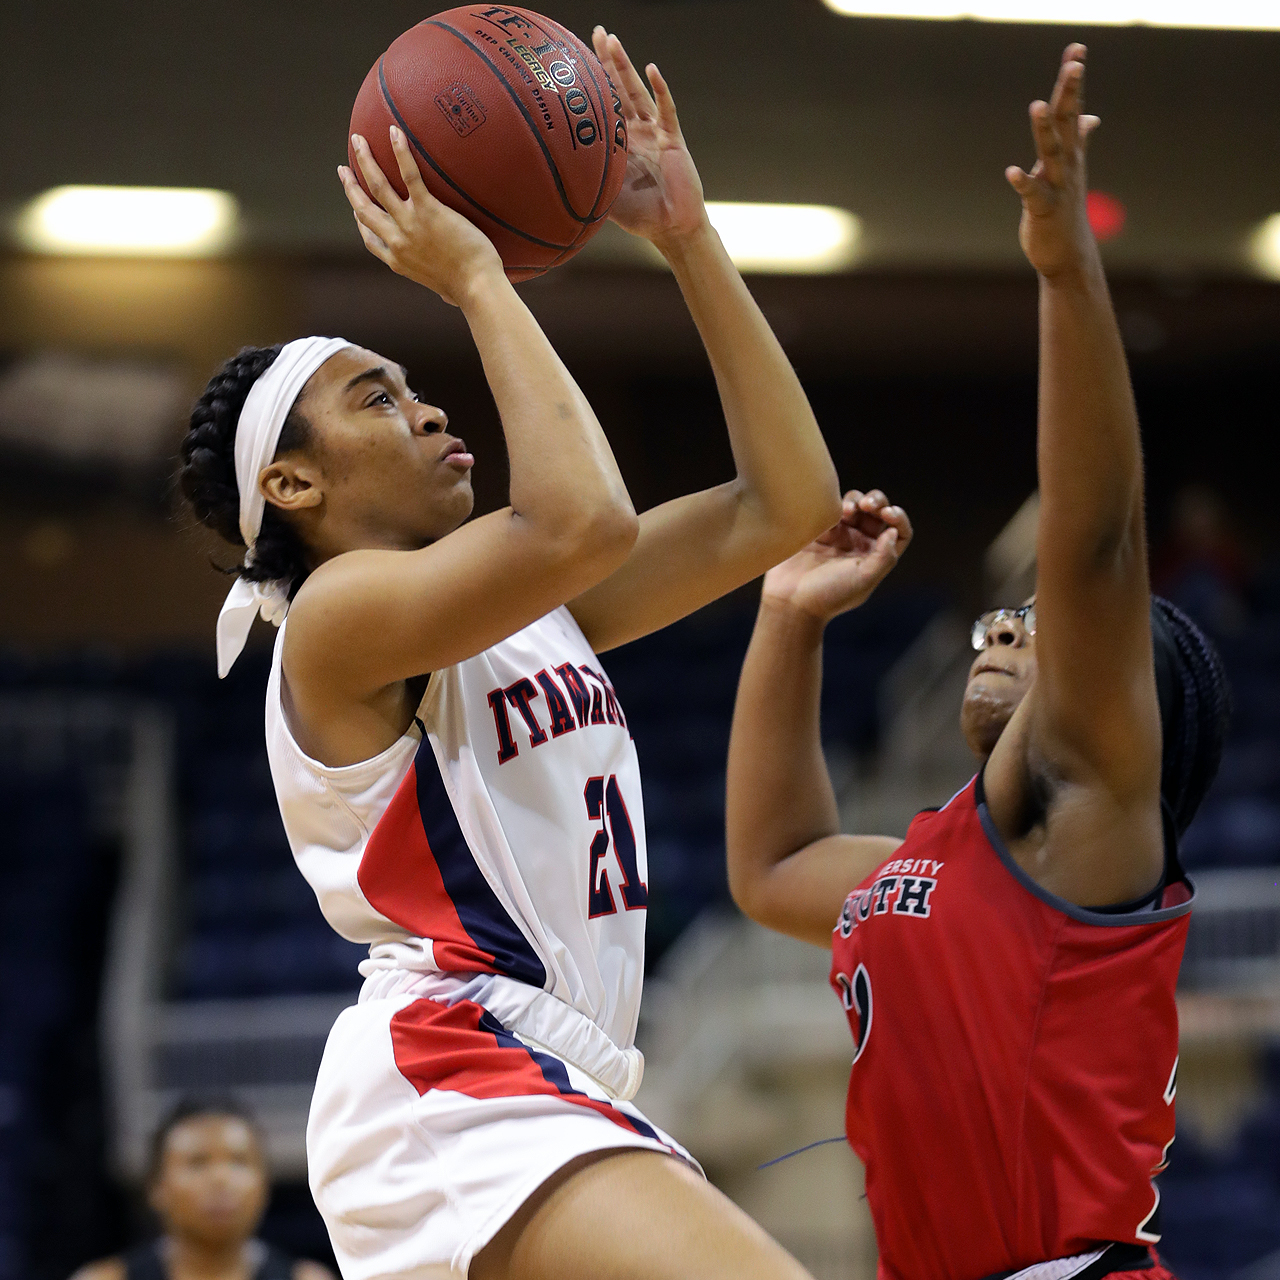 Big third quarter gives Lady Indians 96-37 win over ASU Mid-South